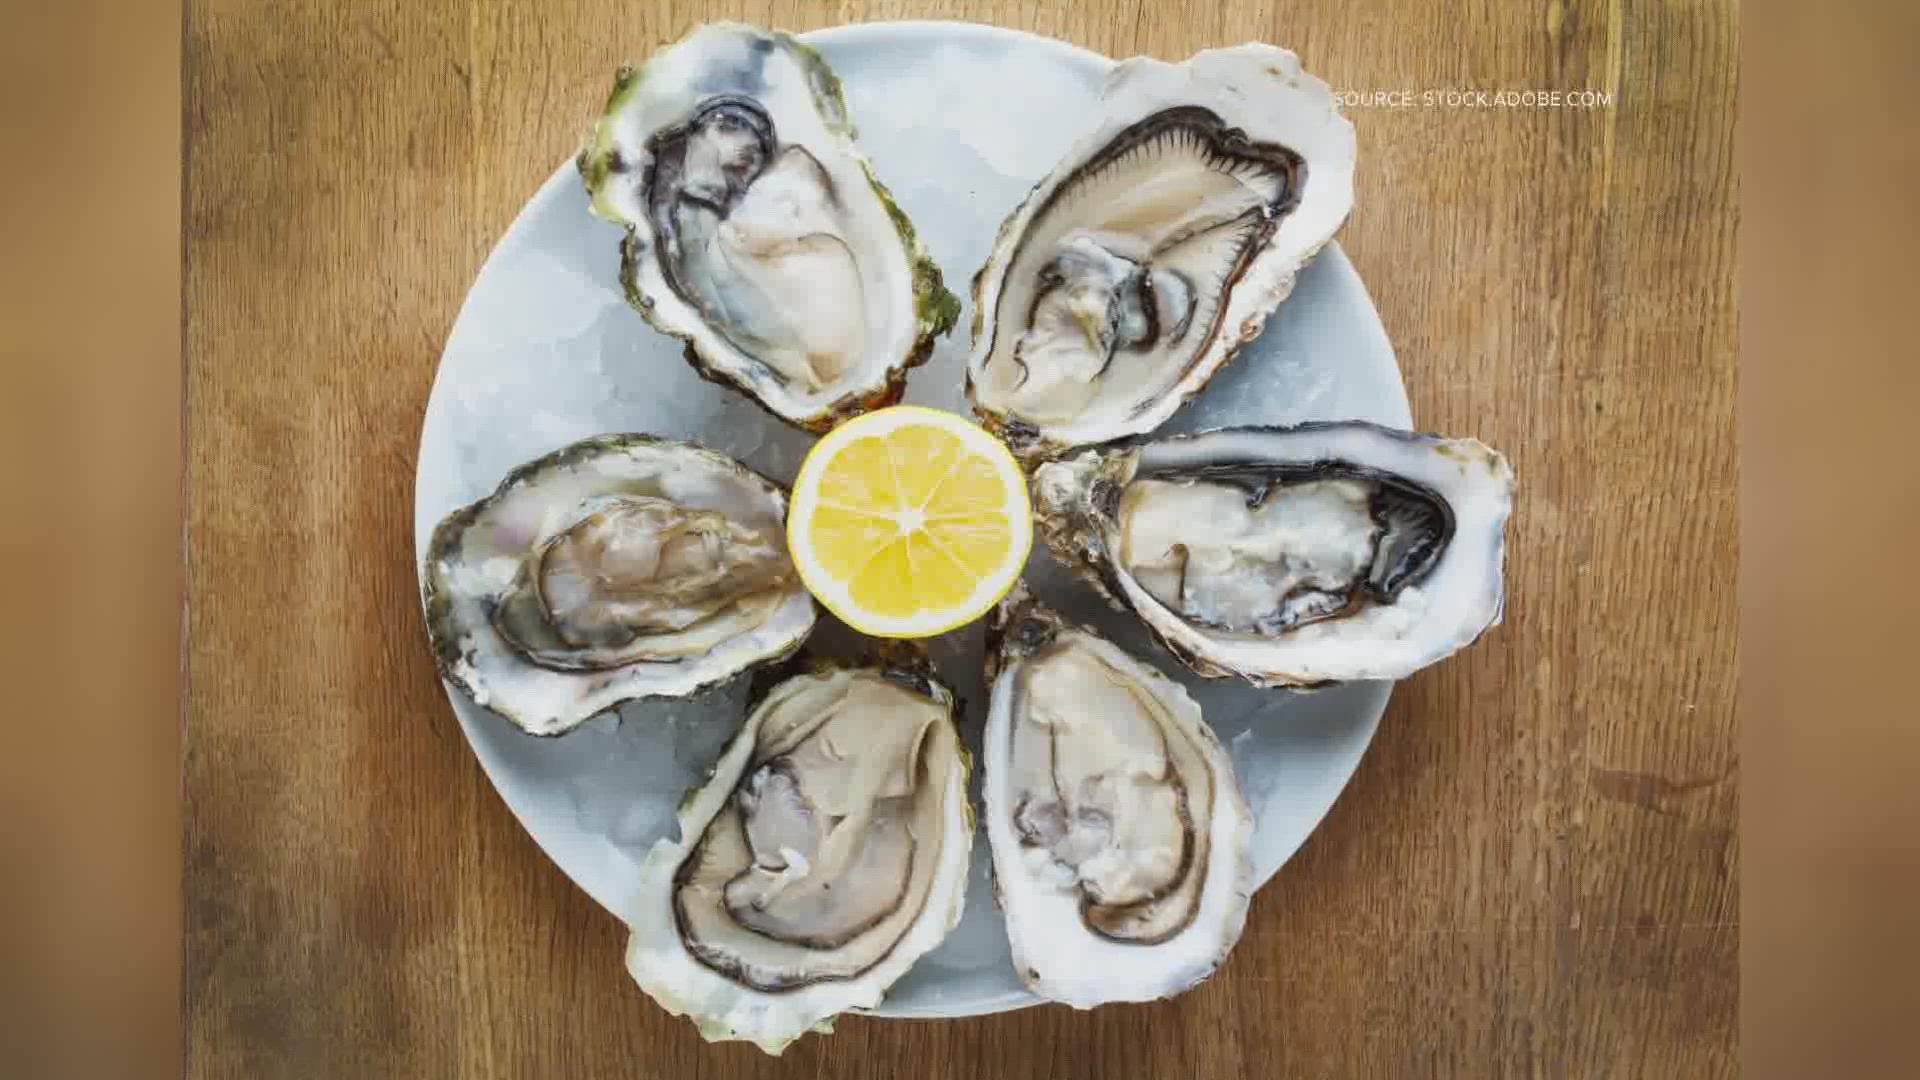 The old claim not to eat oysters in summer is an old wives’ tale. Refrigeration and modern farming have made oysters edible year-round, though cooked are safest.